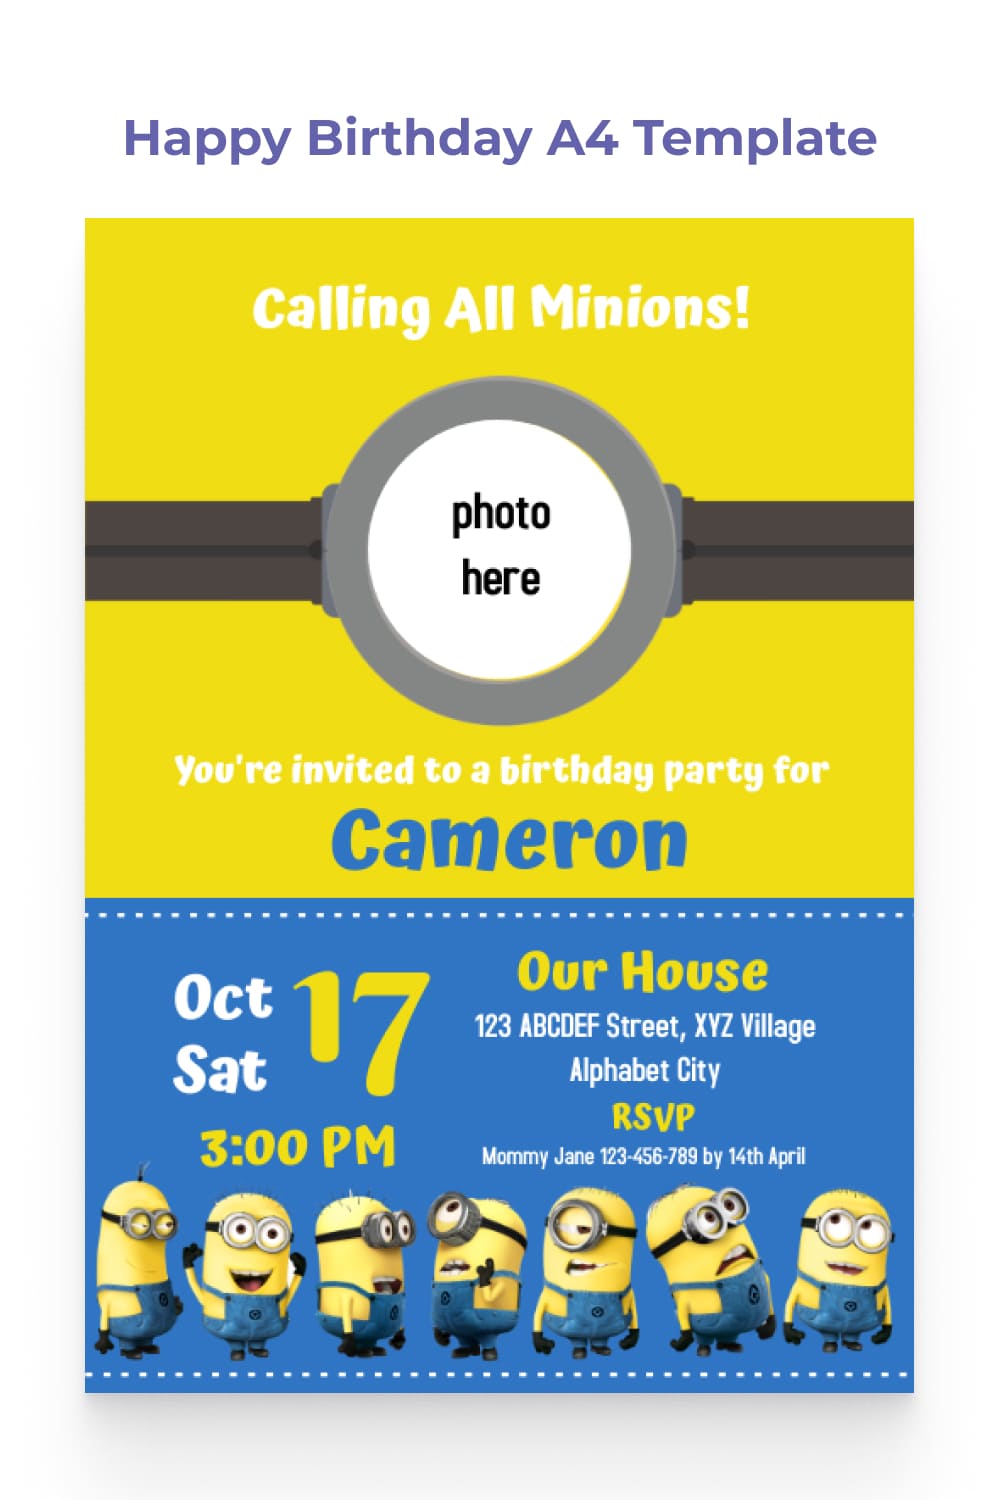 Minions birthday invitation with yellow and blue background.